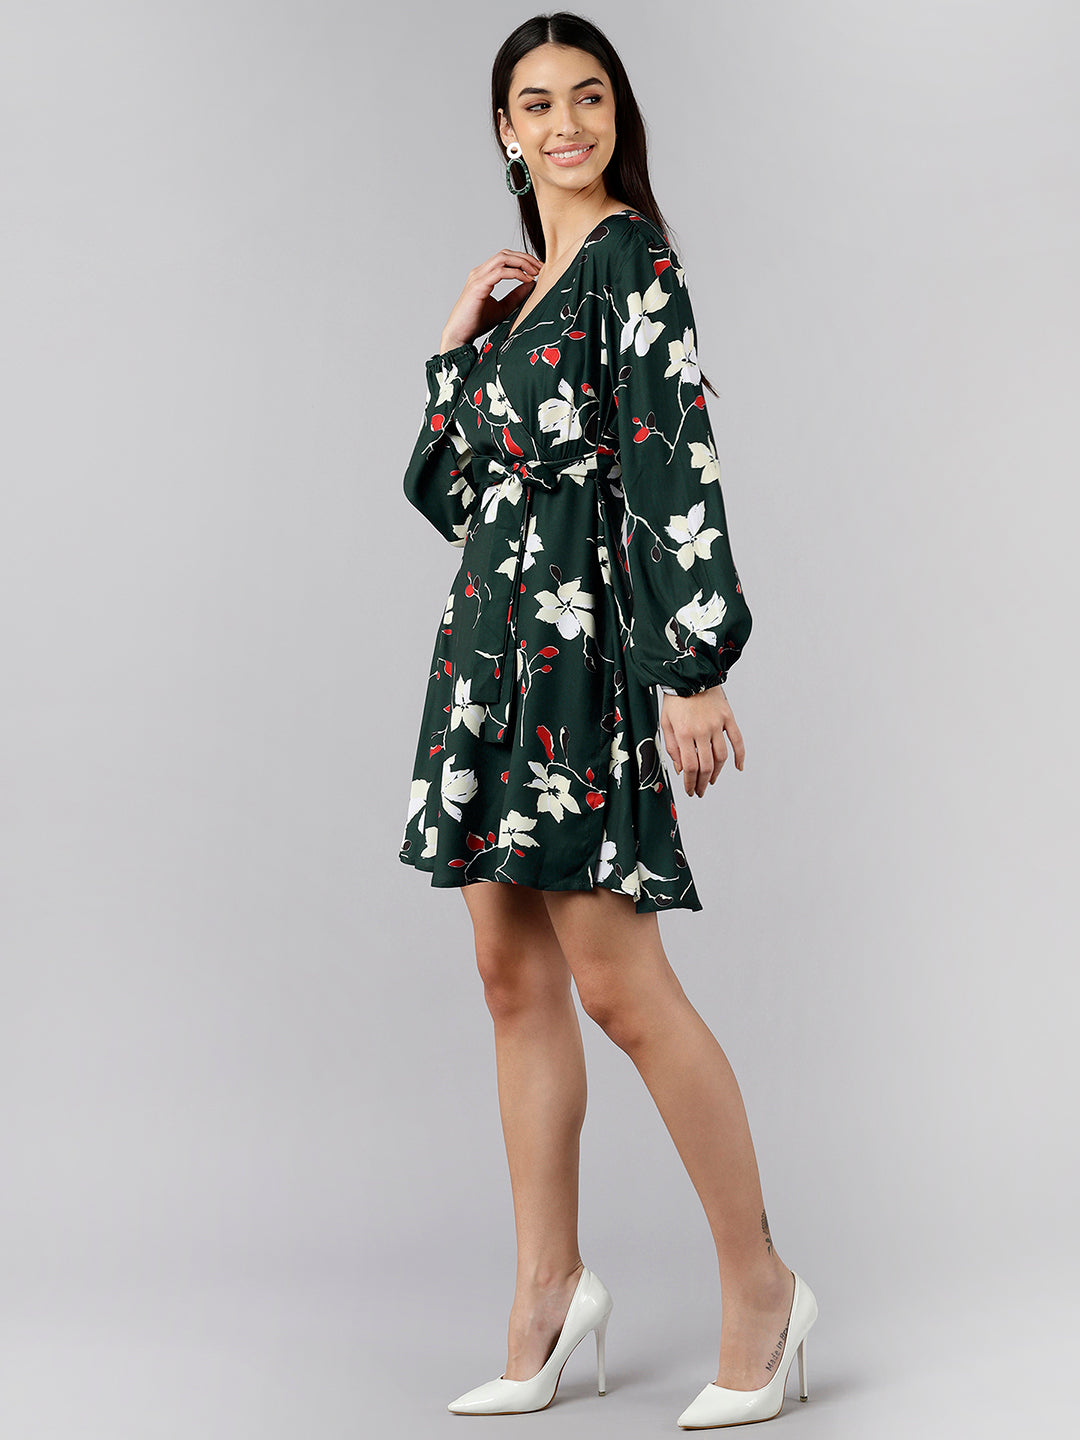 Women's Green Polyester Floral Printed Dress  - Ahika